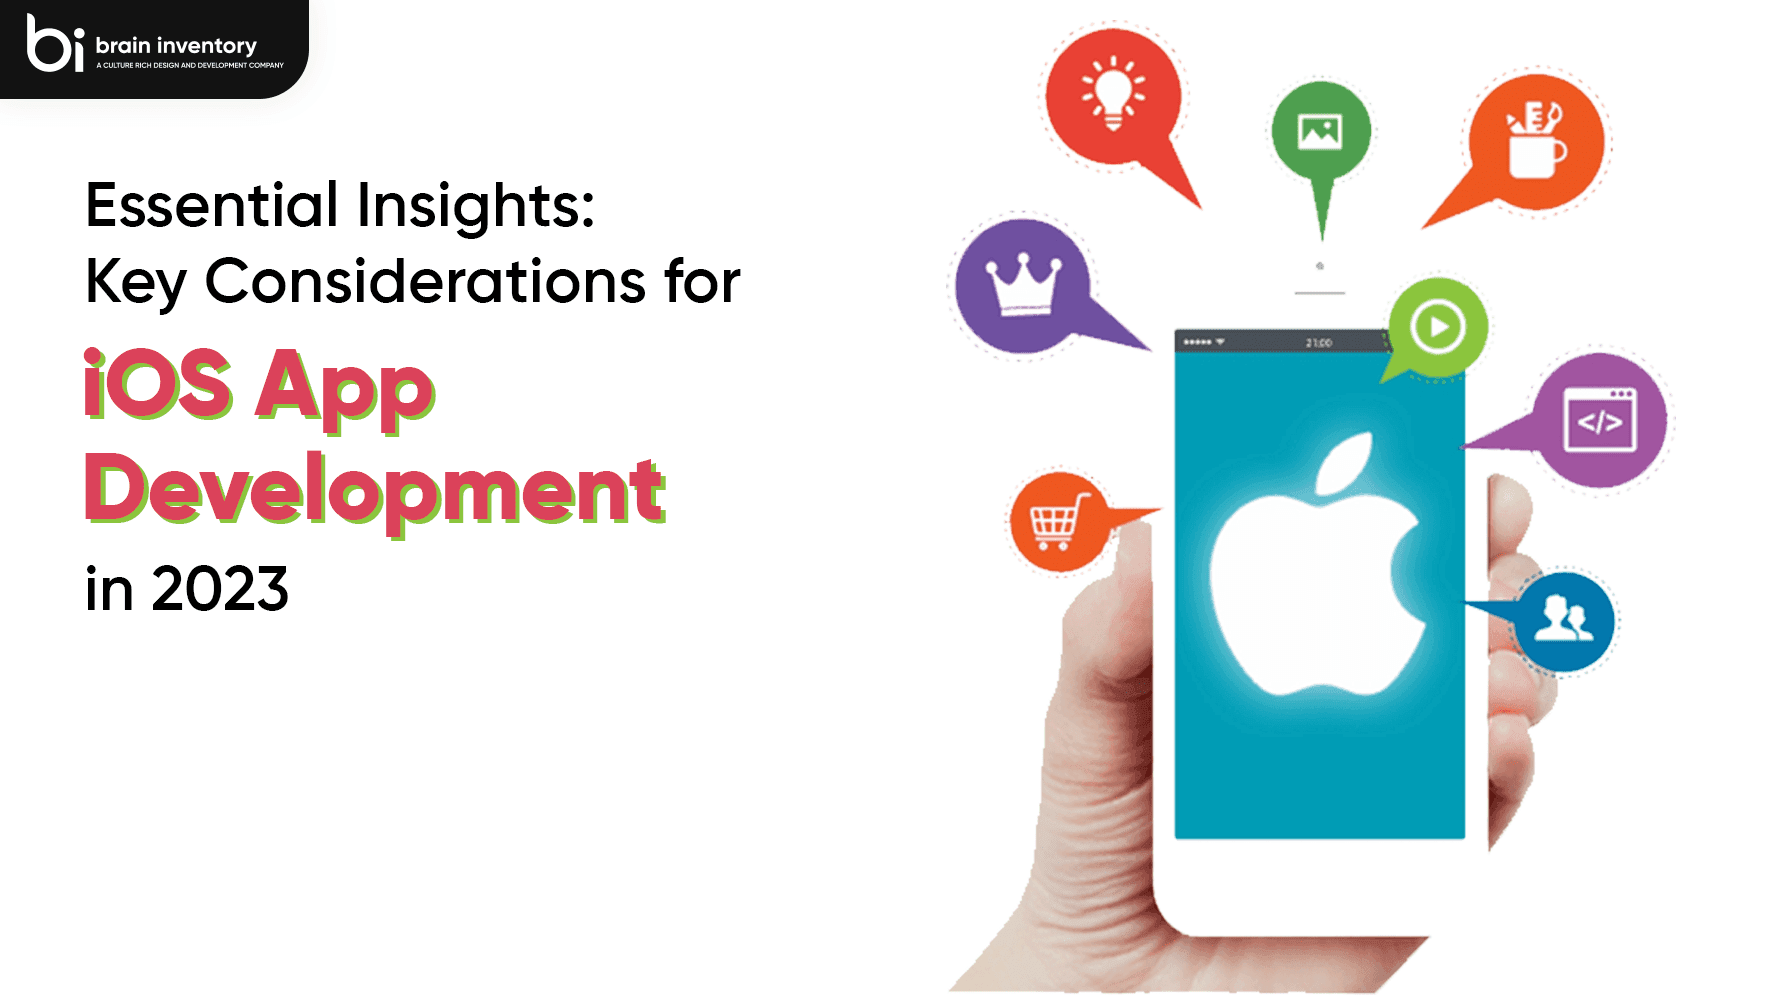 Essential Insights: Key Considerations for iOS App Development in 2023